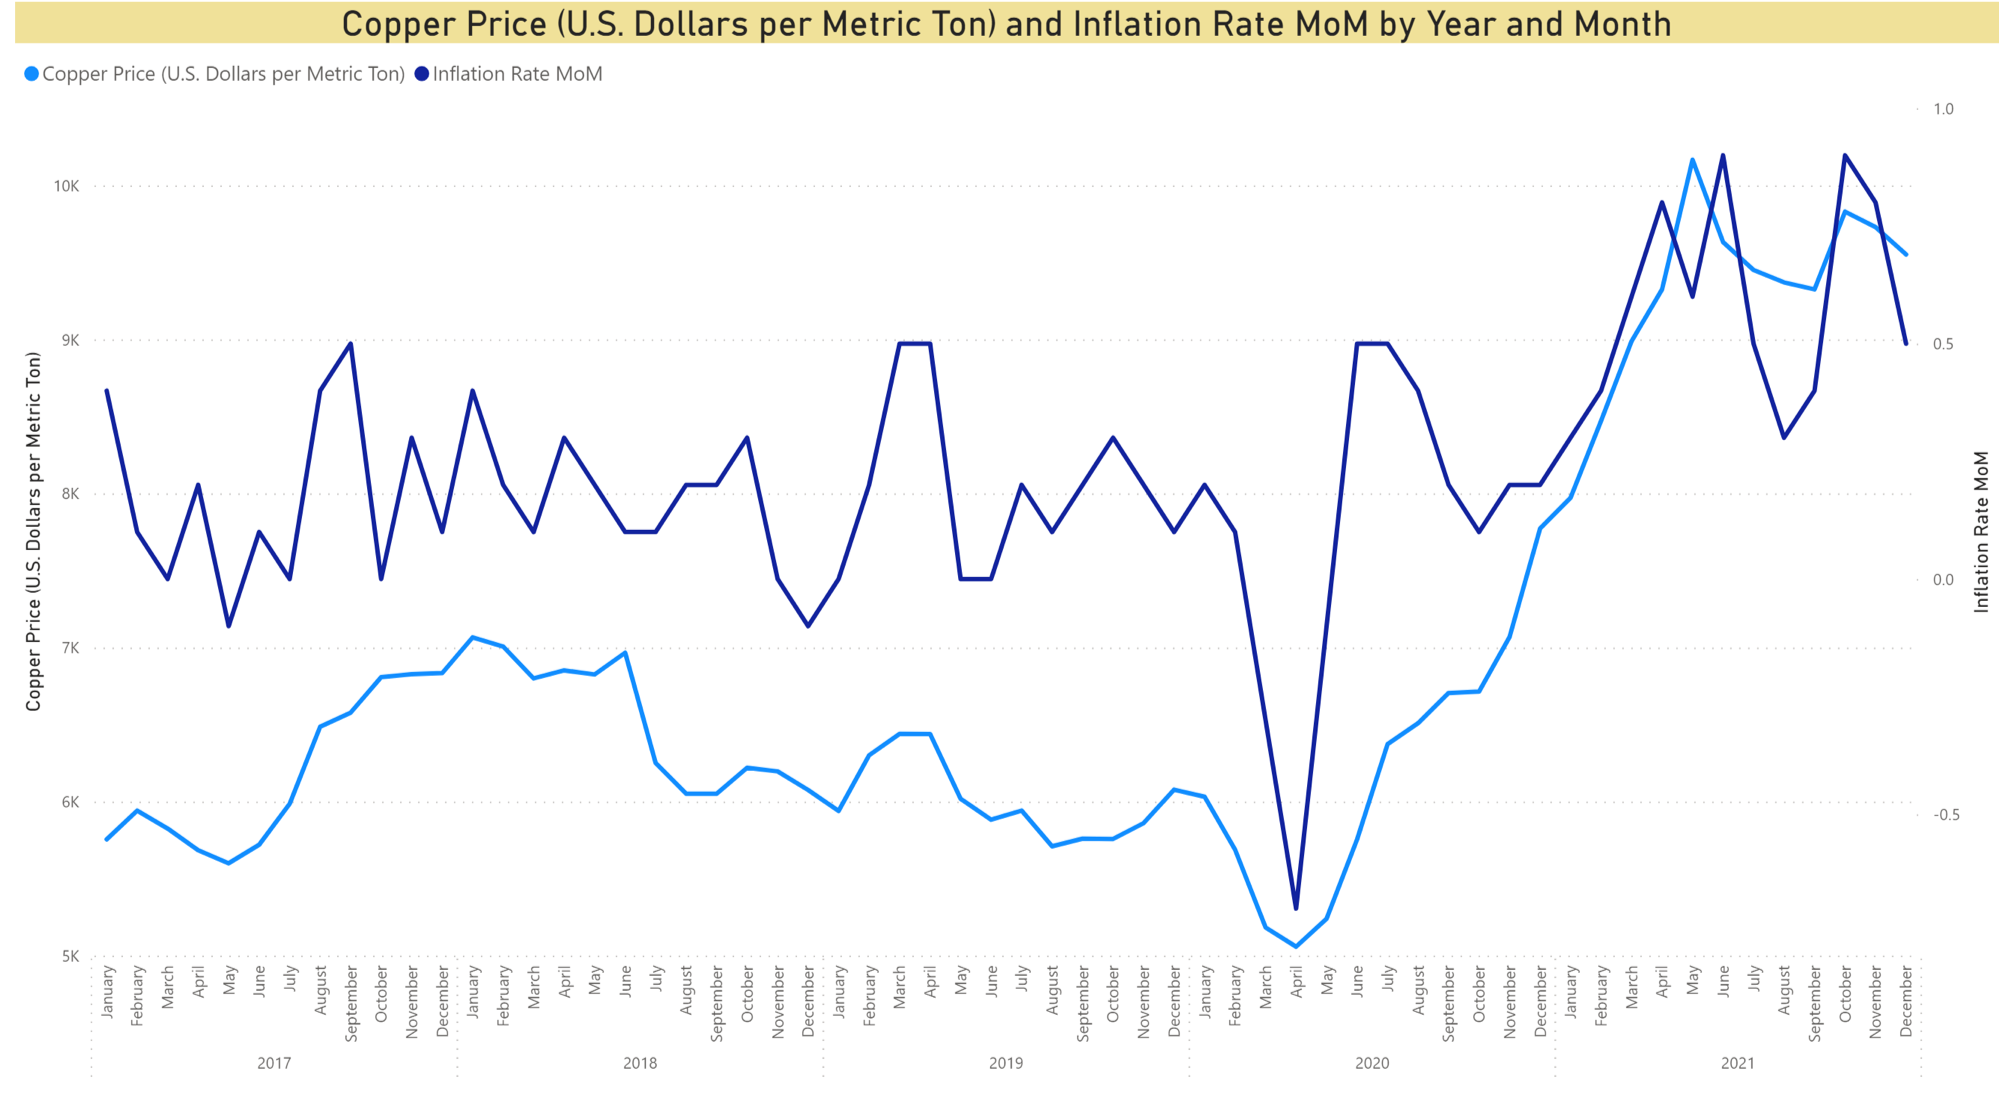 Copper Price and Inflation Rate Correlation = 0.7181